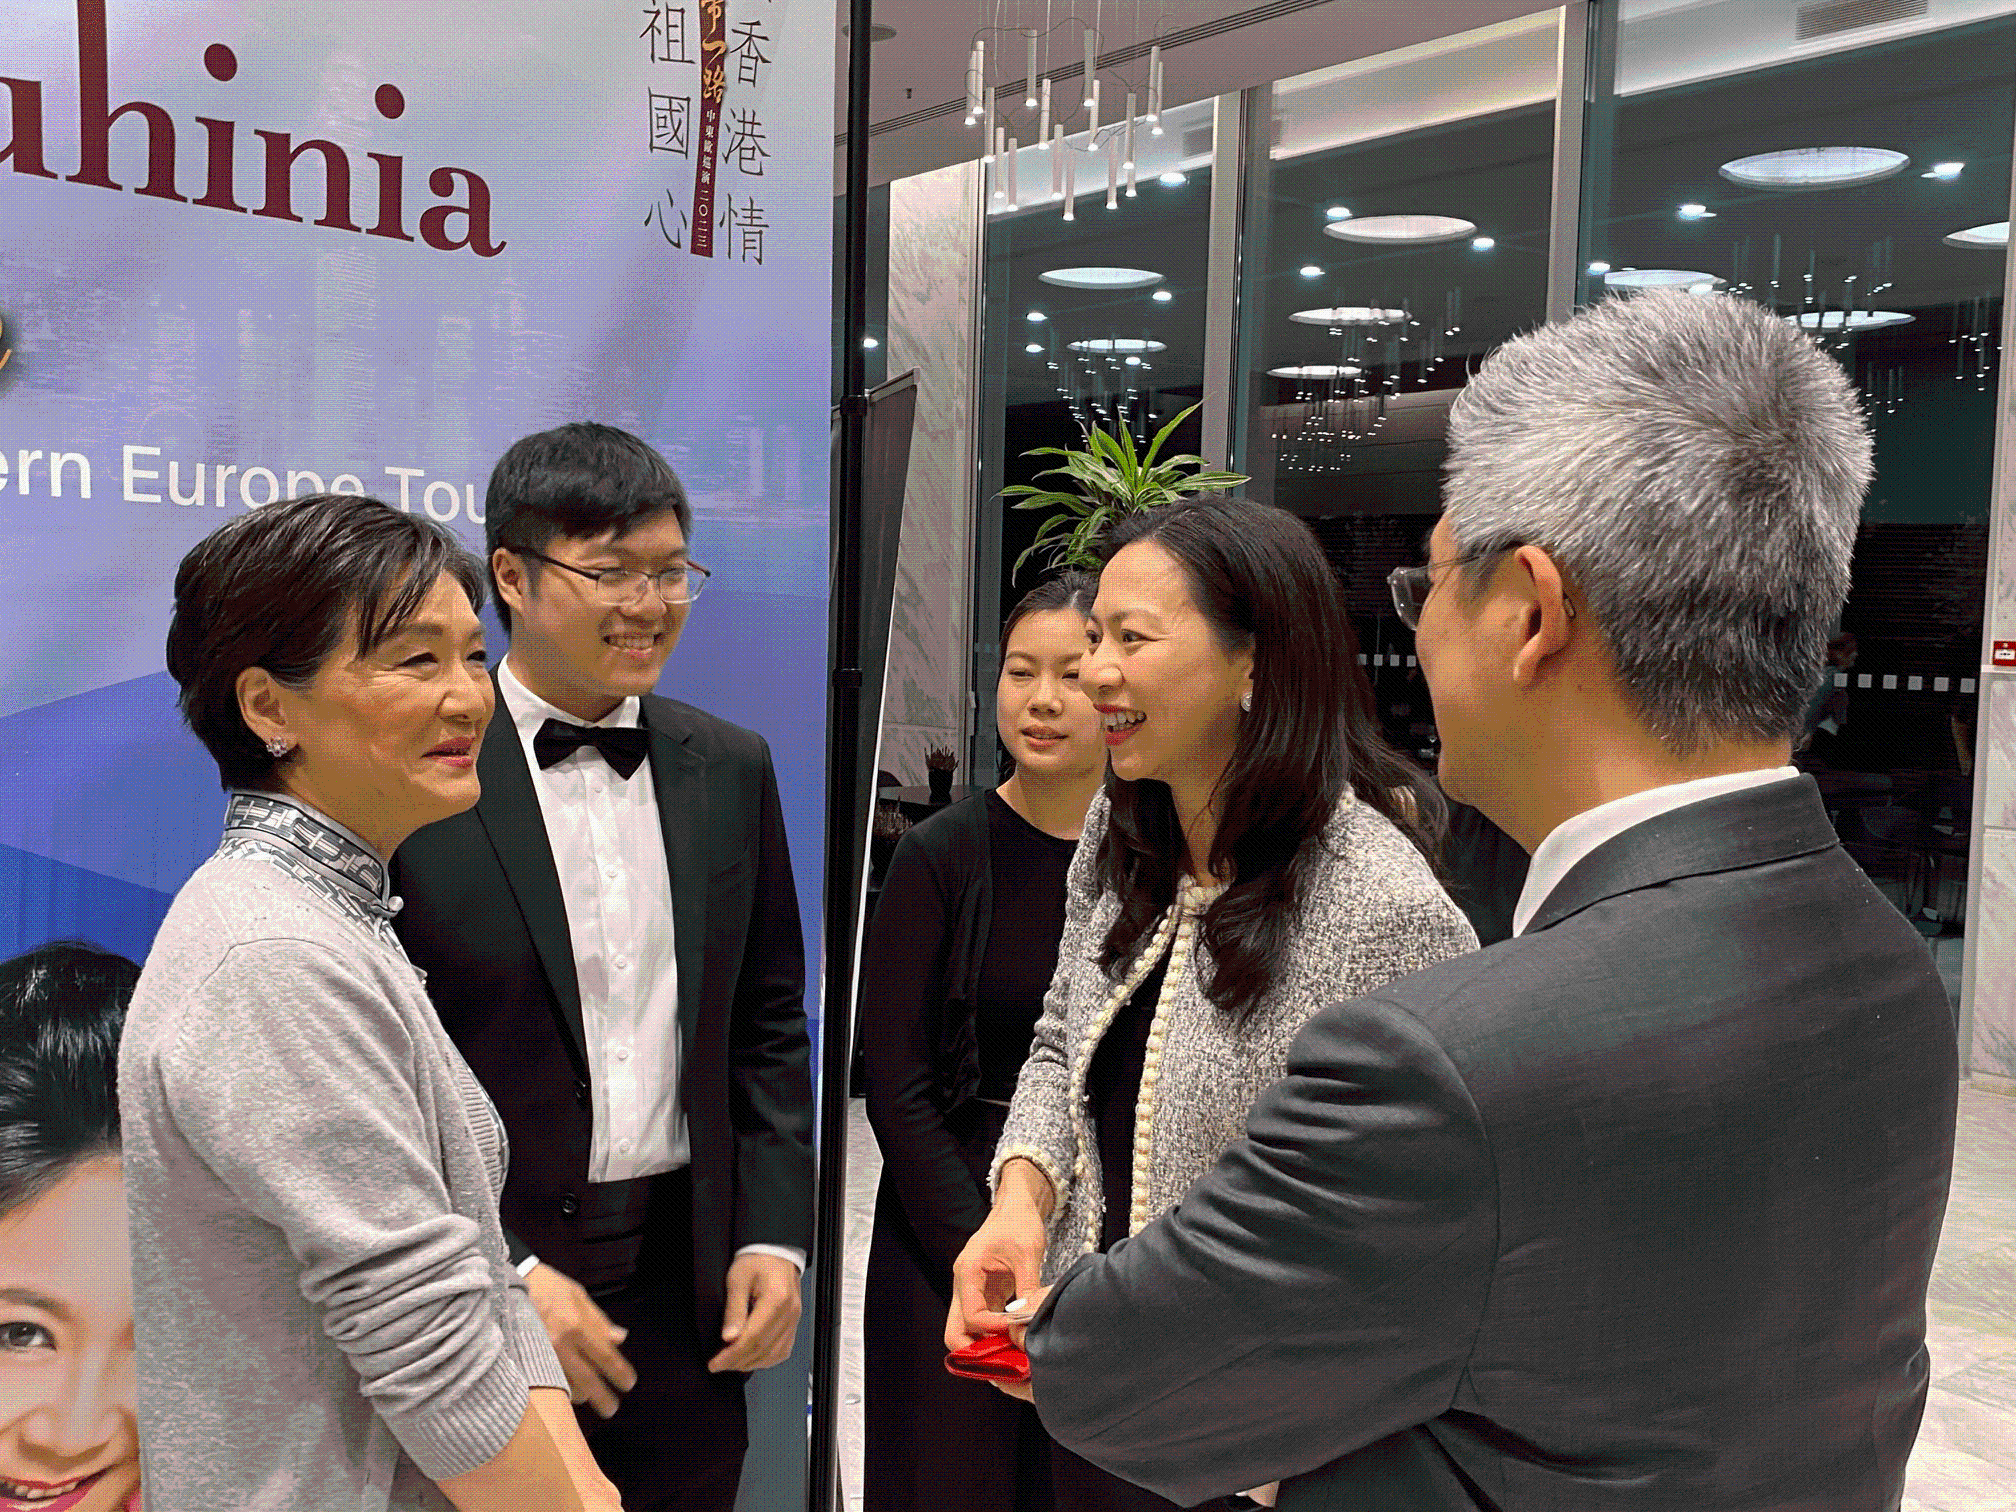 The Hong Kong Economic and Trade Office in Brussels (HKETO, Brussels) supported the first show of the Hong Kong String Orchestra (HKSO) Central and Eastern Europe tour in Athens, Greece, and organised a pre-concert networking event on November 9. Photo shows Deputy Representative of the HKETO, Brussels, Miss Fiona Li (second right) introducing the work of the HKETO, Brussels, on promoting the concert tour as well as the Belt and Road Initiative through music, arts and culture to the Founder and Artistic Director of the HKSO, Ms Yao Jue (first left).